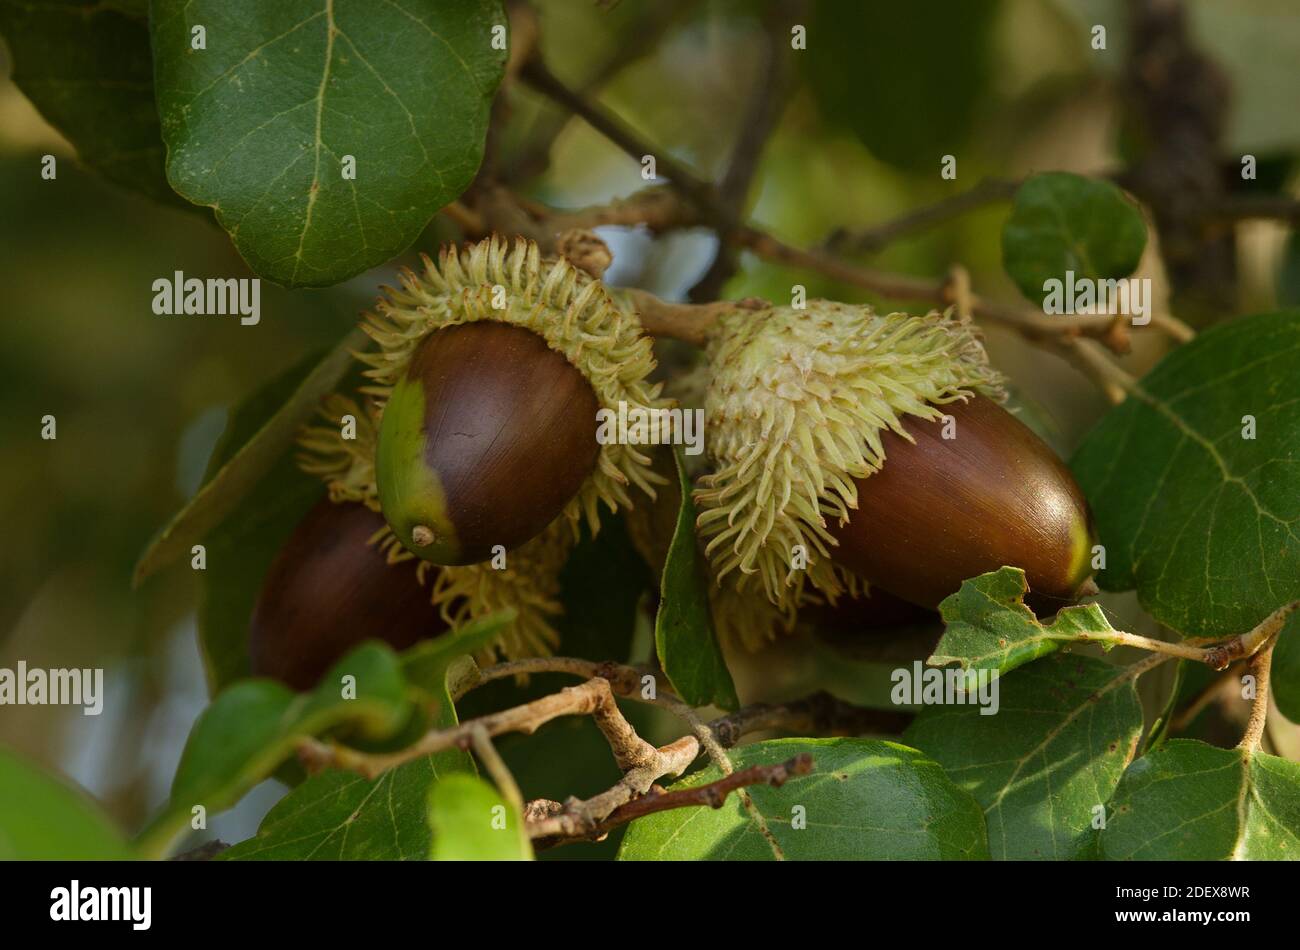 Three brown Cork Oak (Quercus suber) acorns and leaves amidst the tree foliage over a natural background. Arrabida Natural Park, Setubal, Portugal. Stock Photo